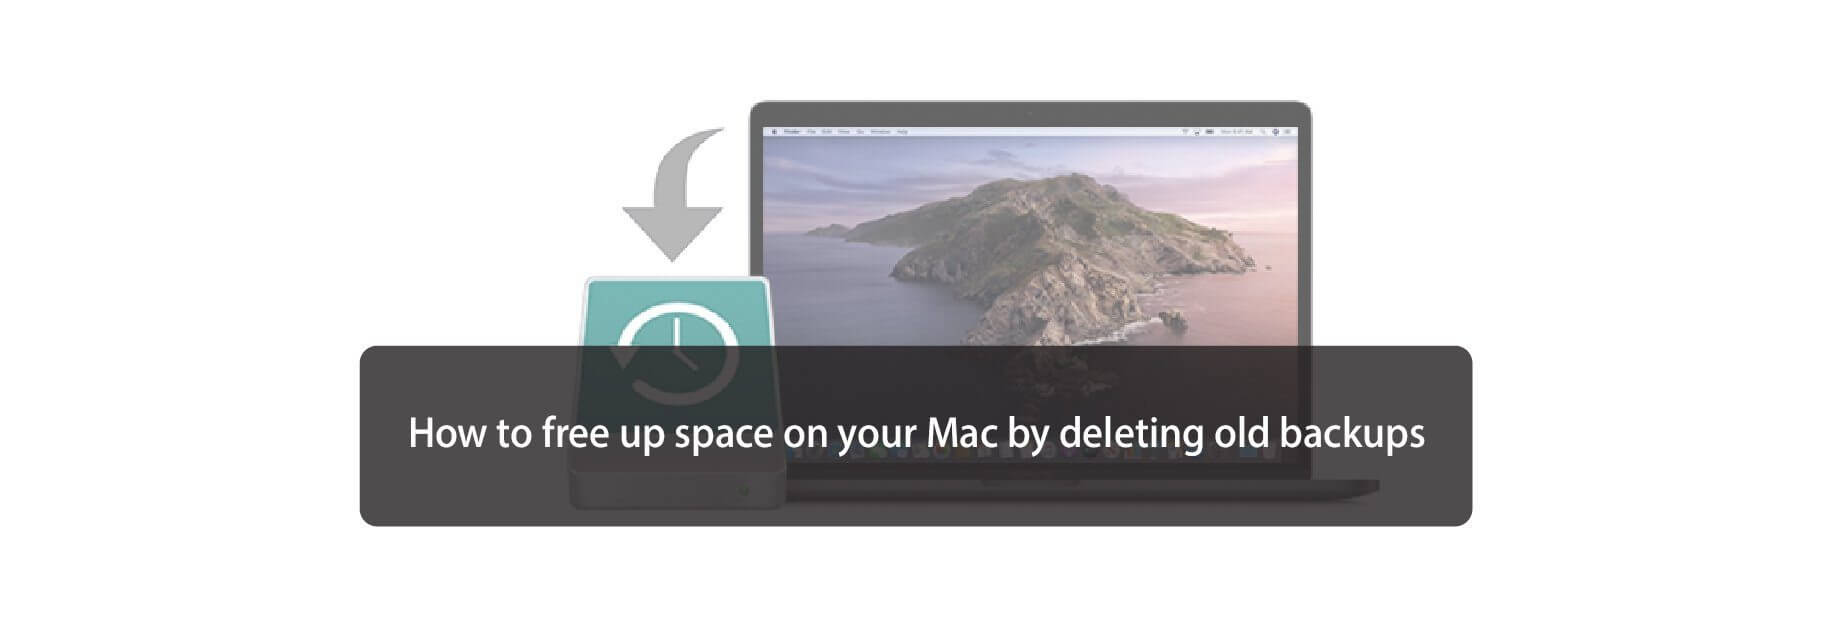 How to free up space on your Mac by deleting old backups